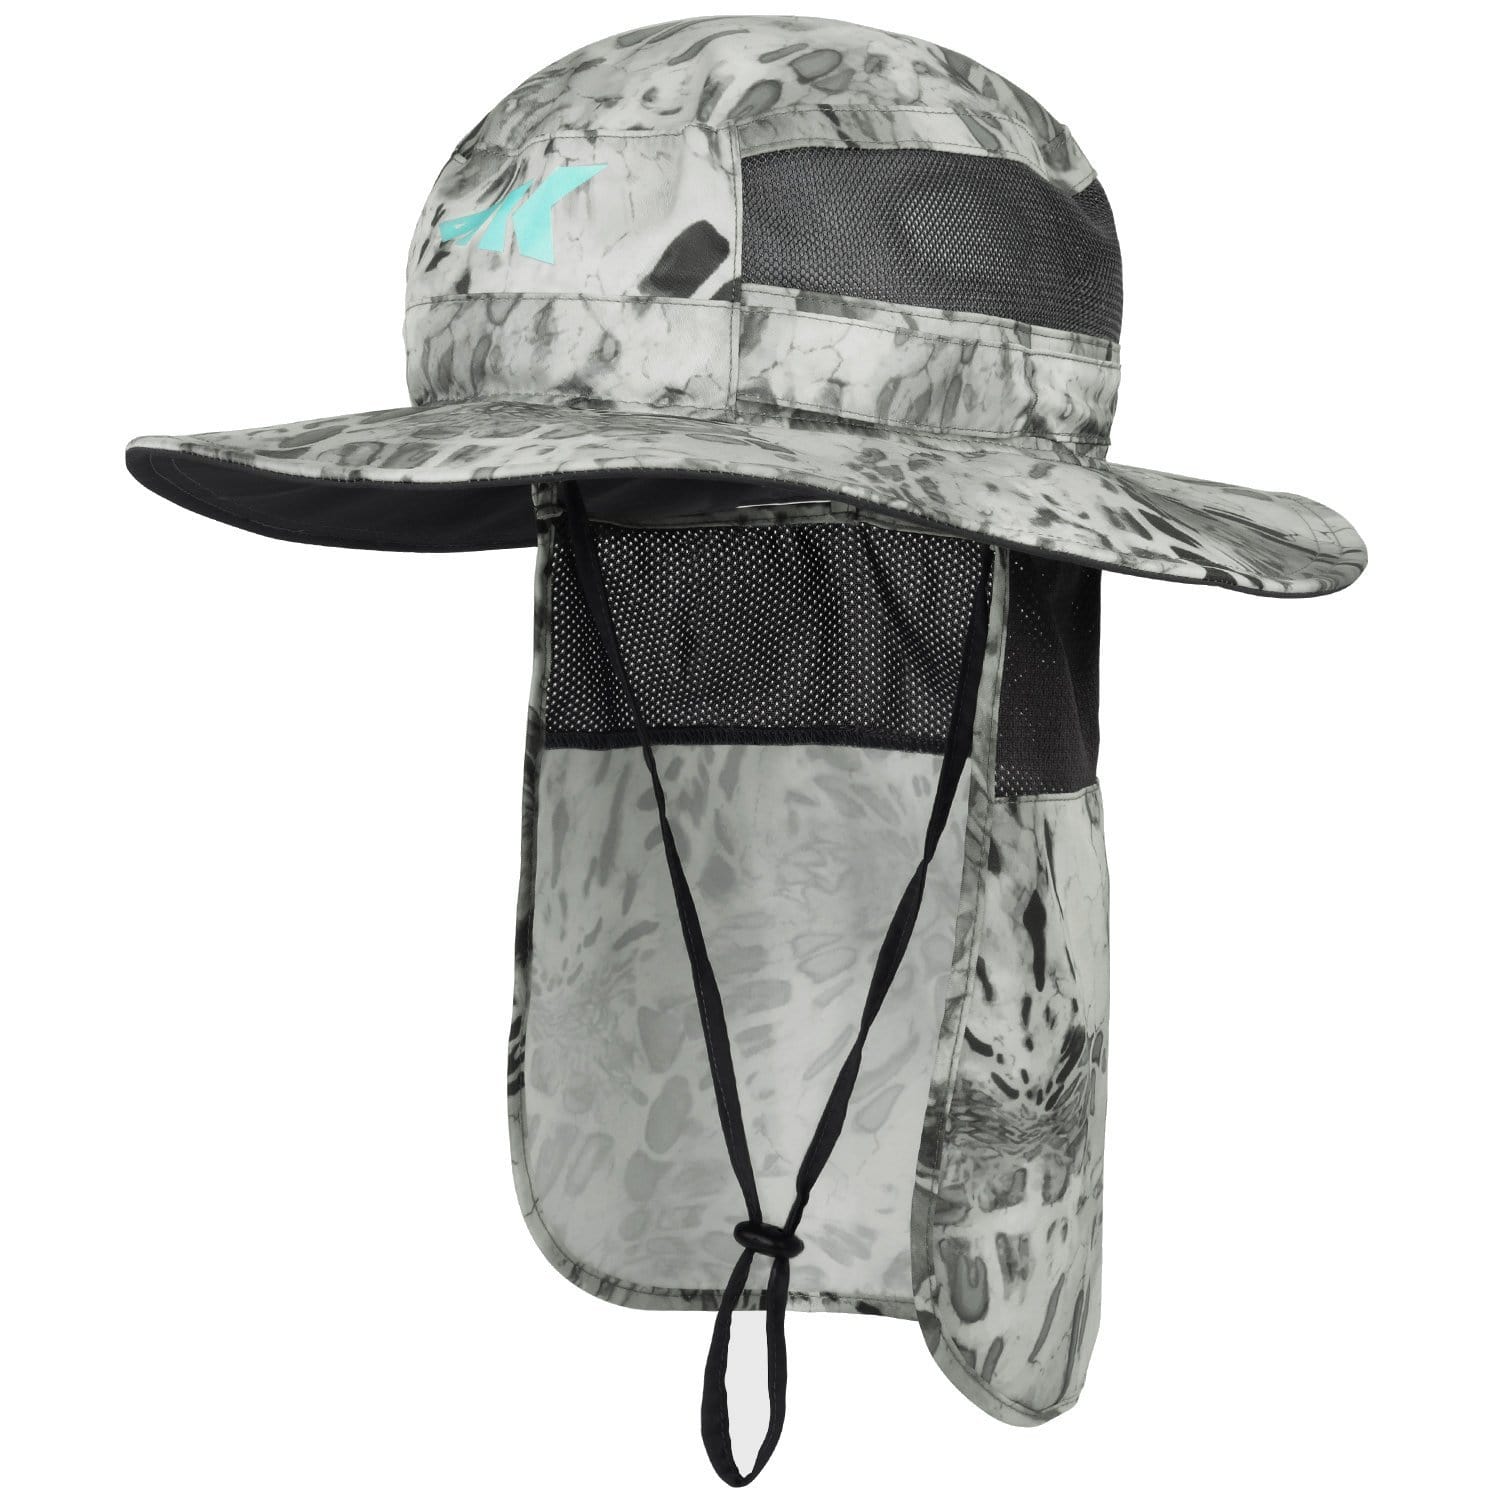 Outdoors Cotton Sun Hat, UPF 50+ Wide Brim Fishing Hat with Neck Flap,  Breathable, Boonie Hat Bucket Cap